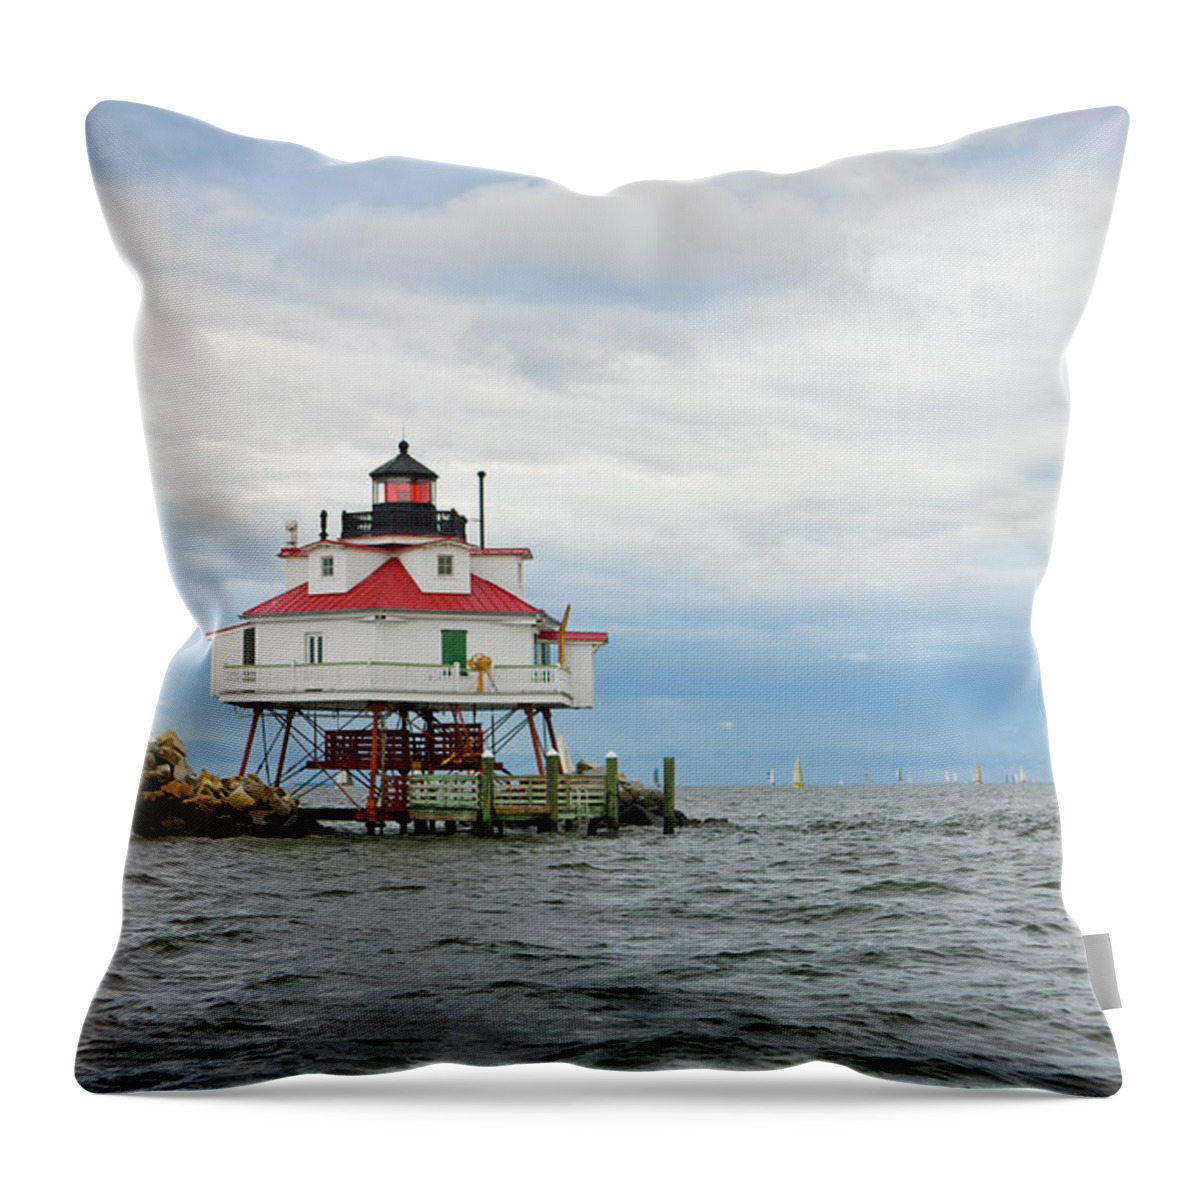 Outdoors Throw Pillow featuring the photograph Thomas Point Lighthouse Chesapeake Bay by Greg Pease